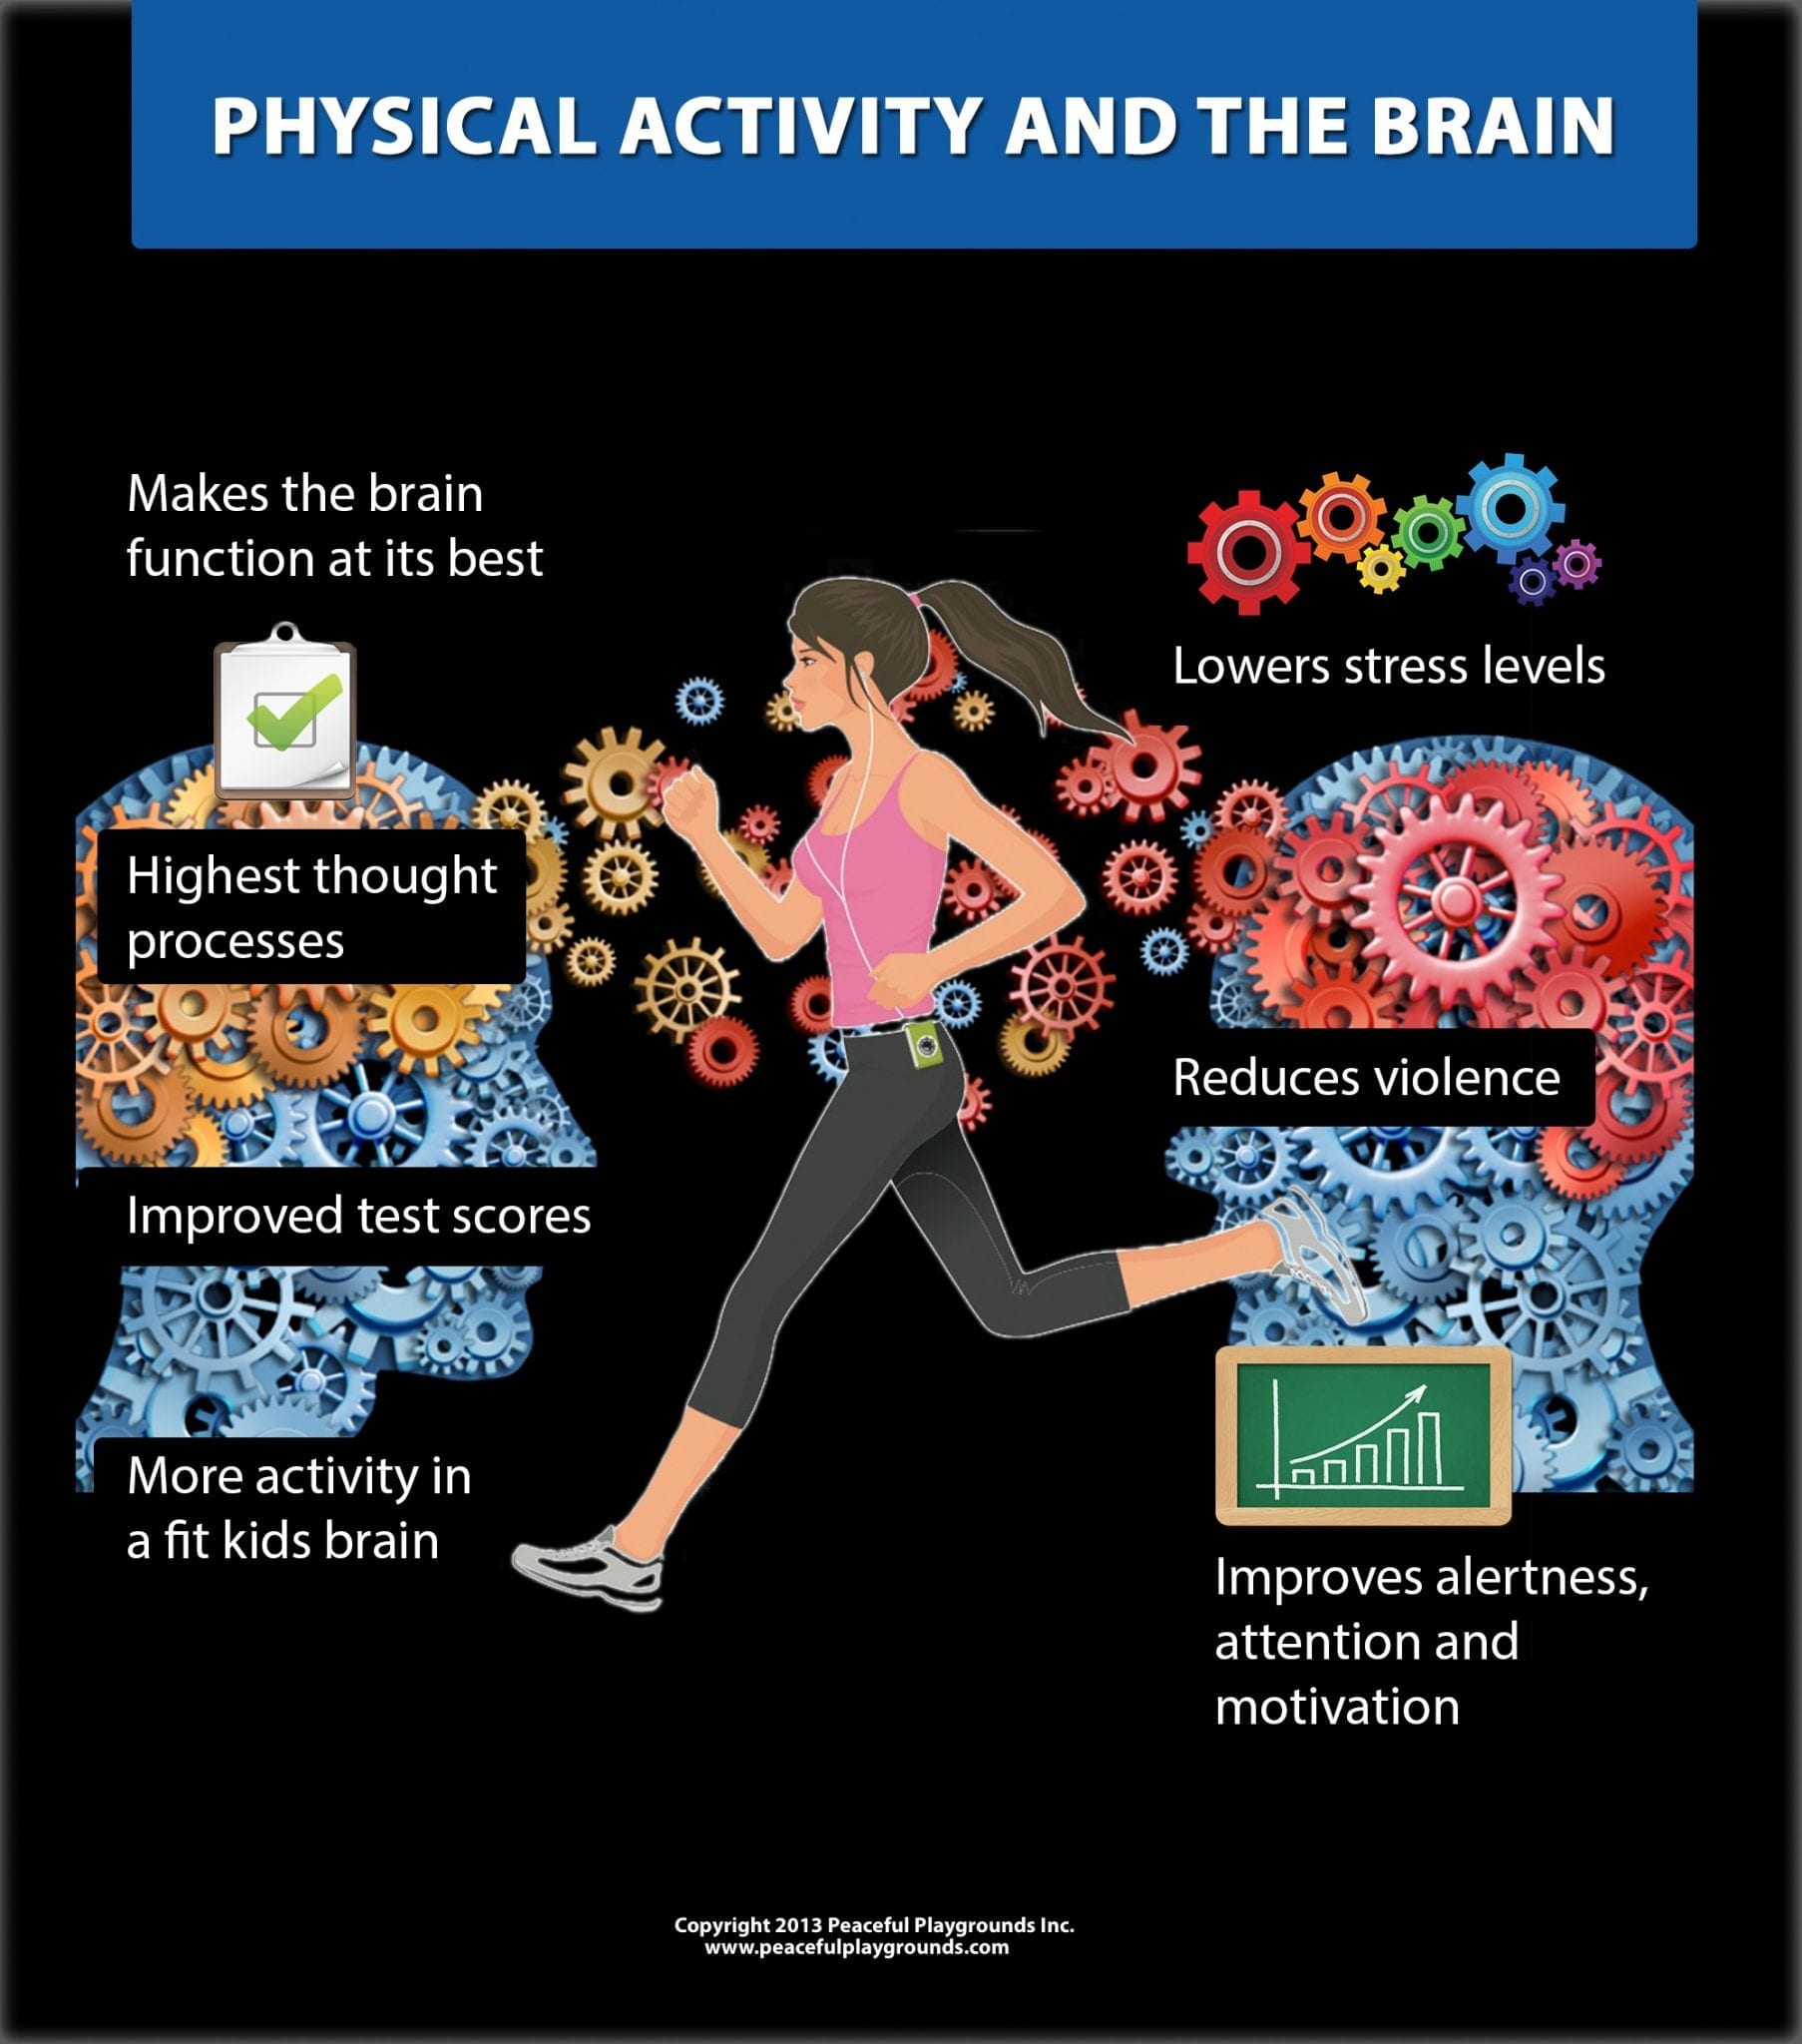 benefits of physical activity for mental health